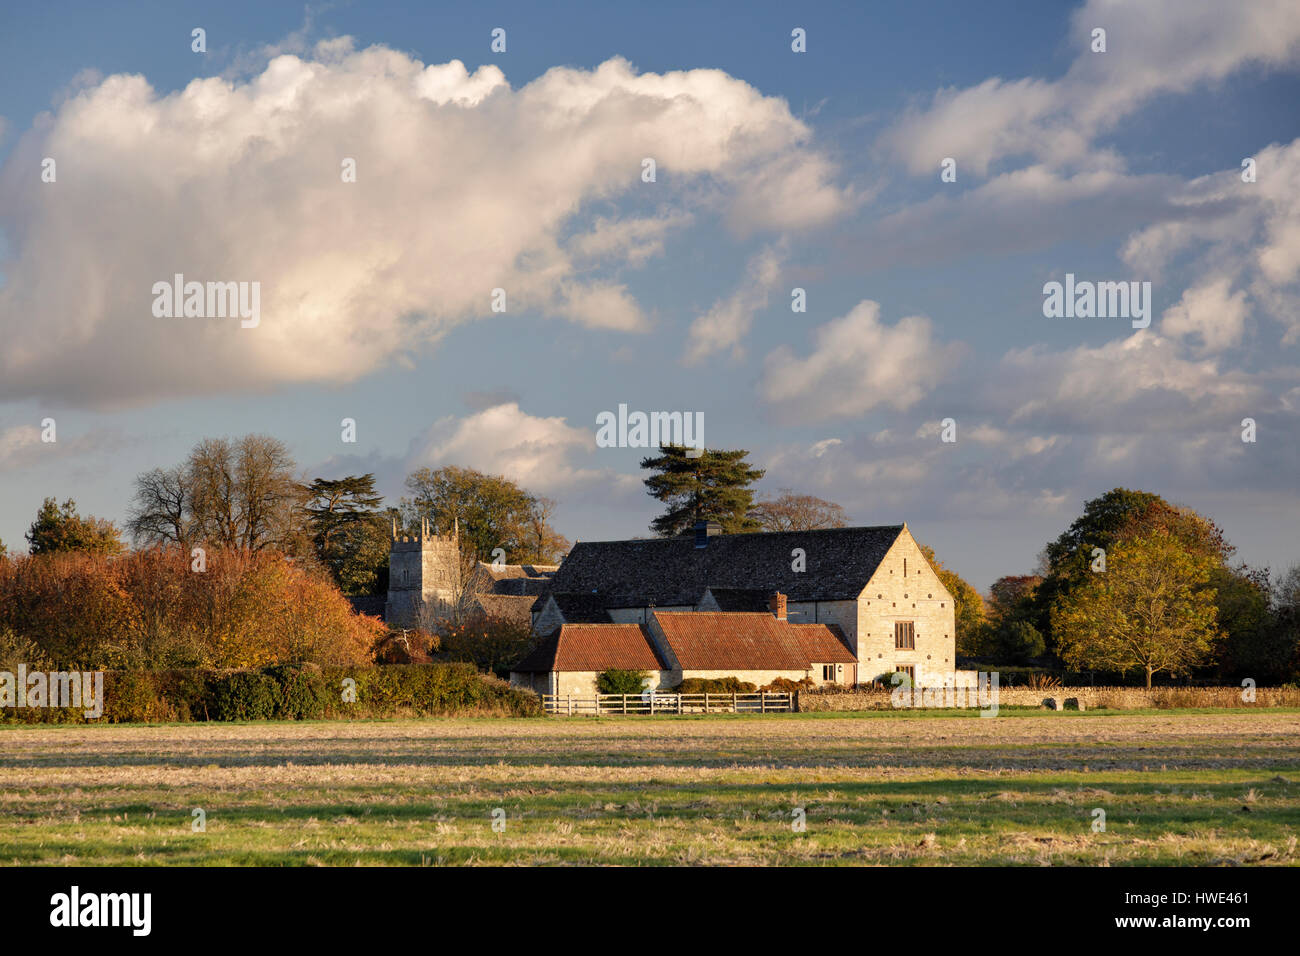 View across farmland towards the village of Somerford Keynes in Gloucestershire with converted barns and a church tower Stock Photo